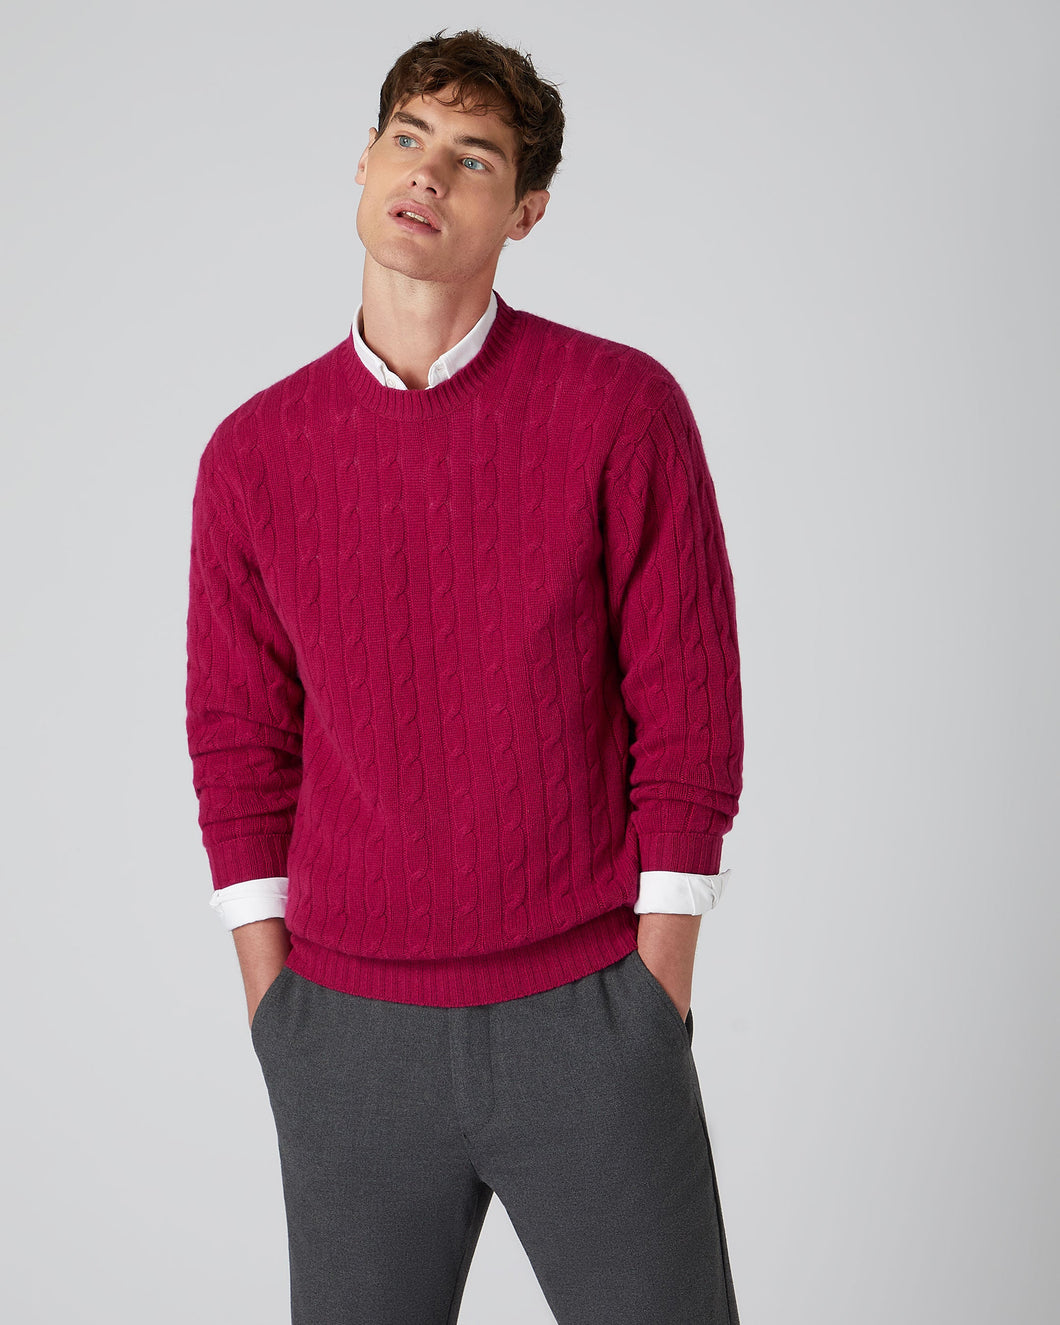 N.Peal Men's The Thames Cable Cashmere Jumper Raspberry Pink